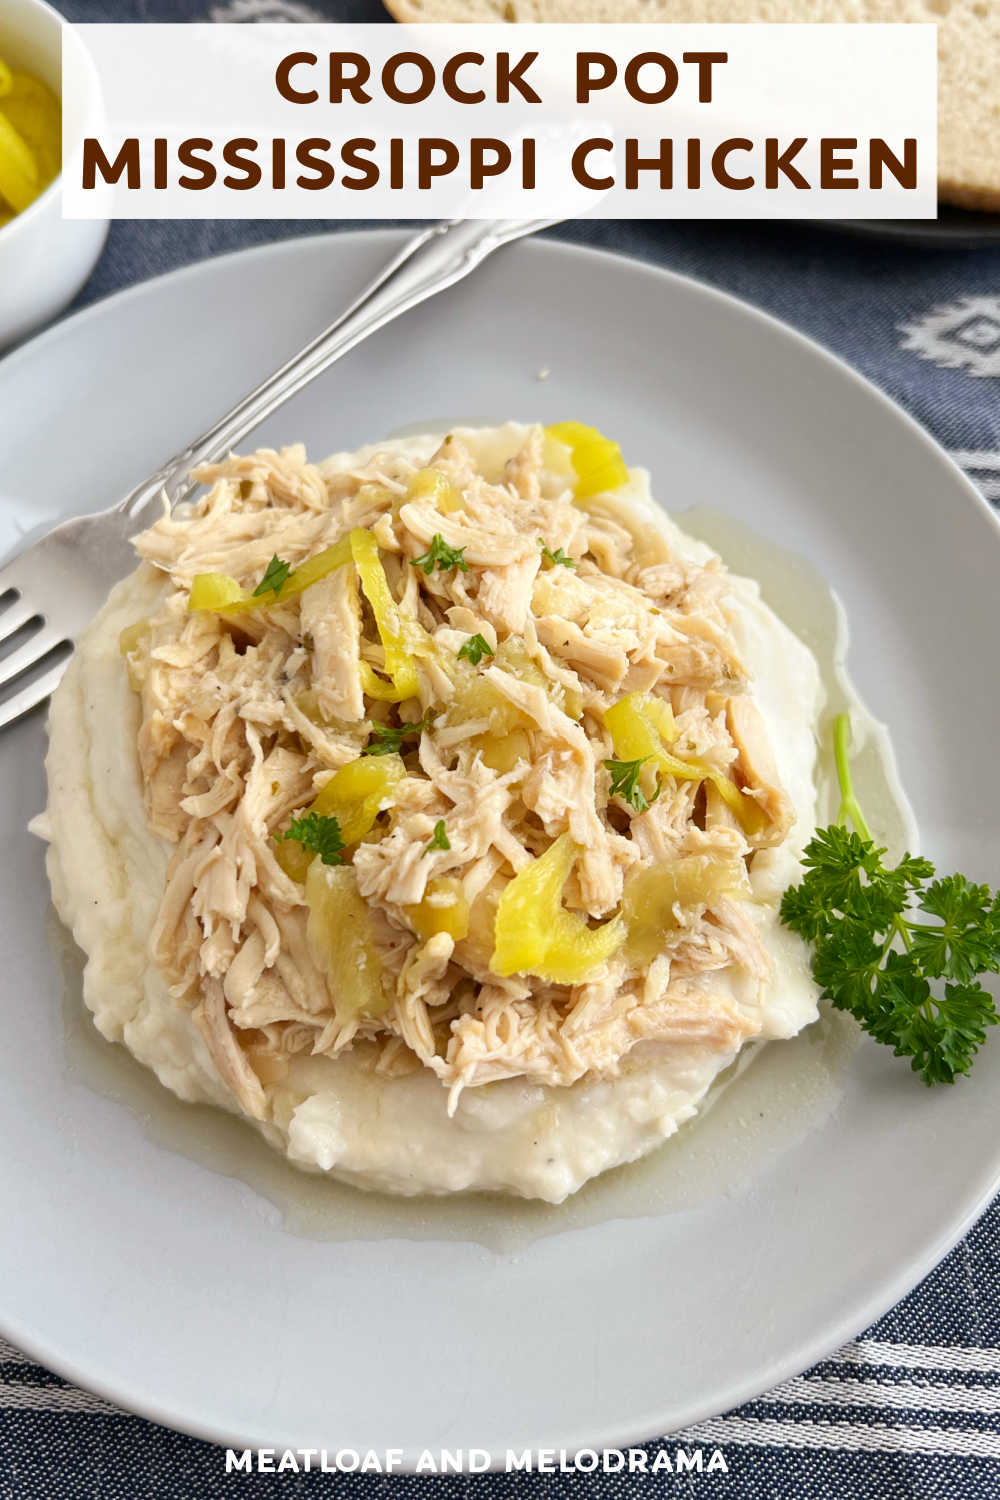 This Crock Pot Mississippi Chicken recipe is an easy meal made with just a few simple ingredients in the slow cooker. A delicious dinner and a family favorite perfect for busy weeknights! via @meamel